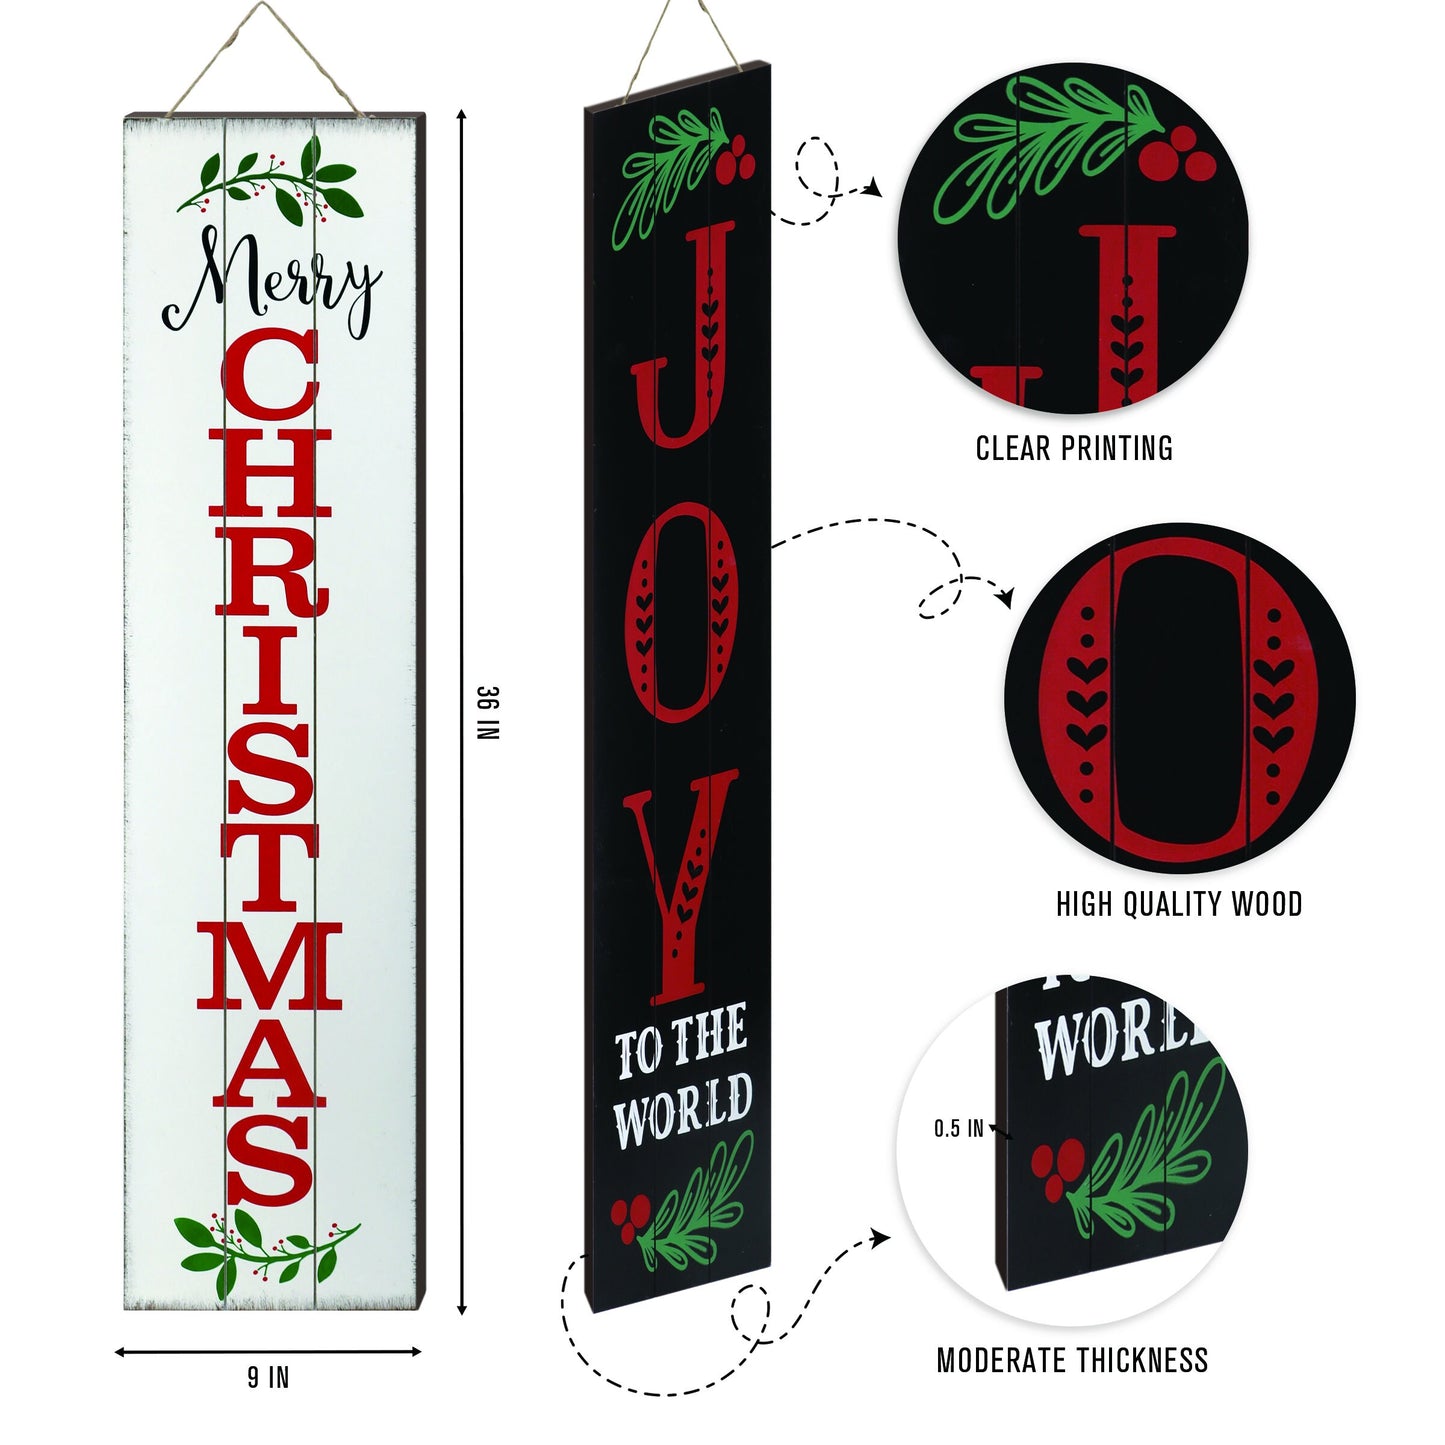 36IN Merry Christmas / JOY To The World Reversible Porch Sign | Festive Double-Sided Holiday Decor